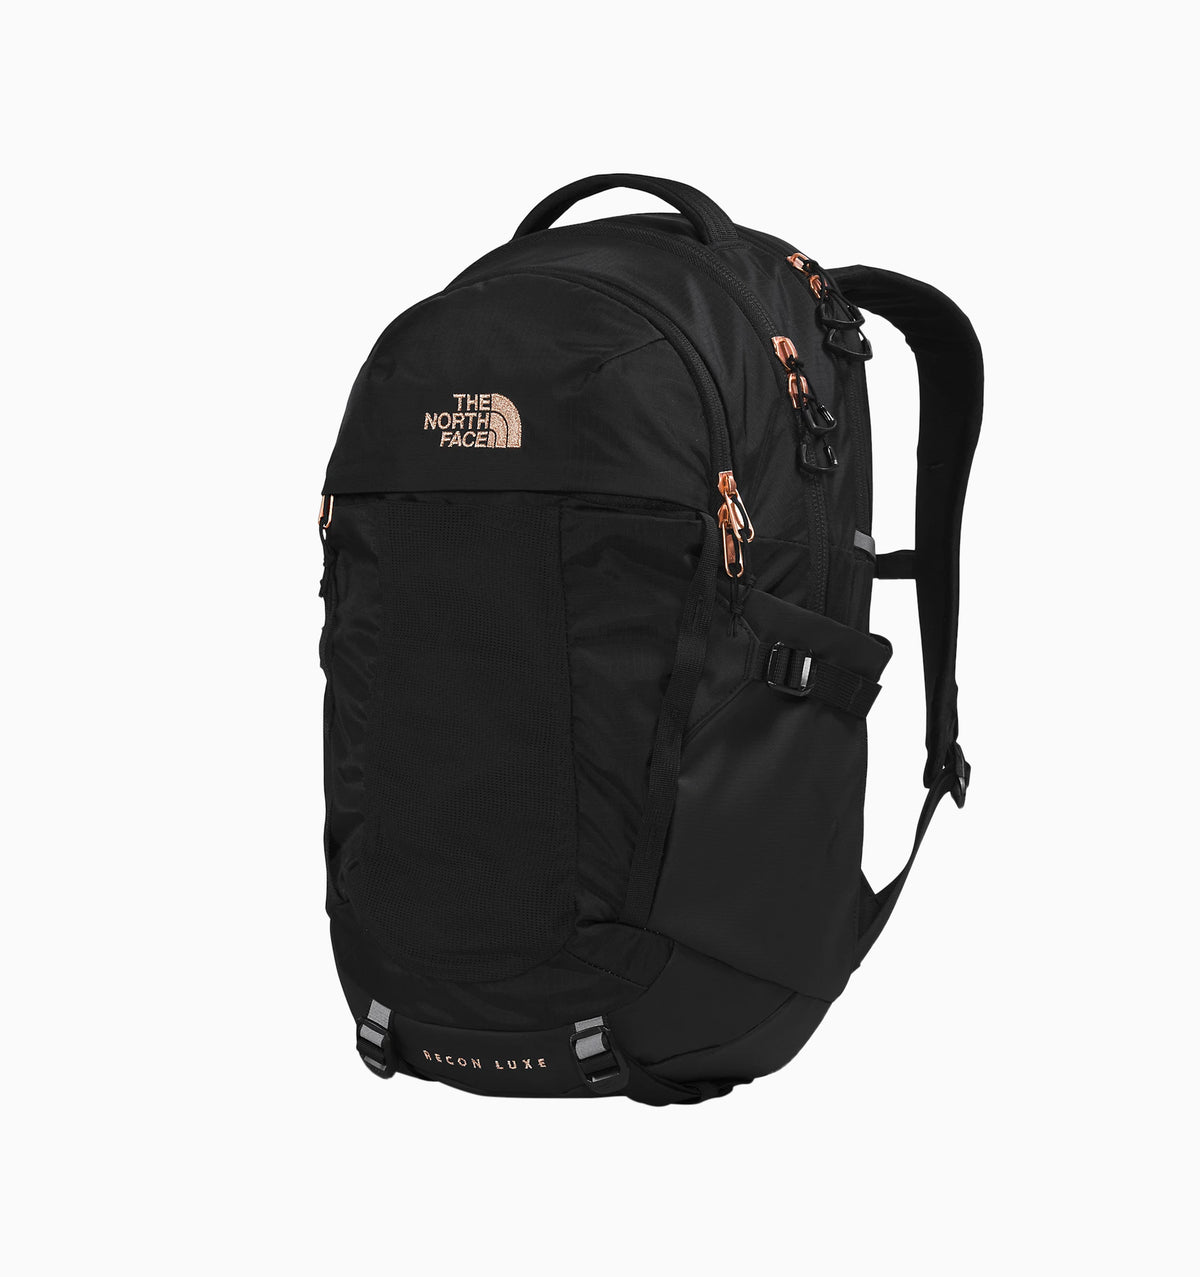 The North Face 18" Women’s Recon Luxe Backpack 30L - Black